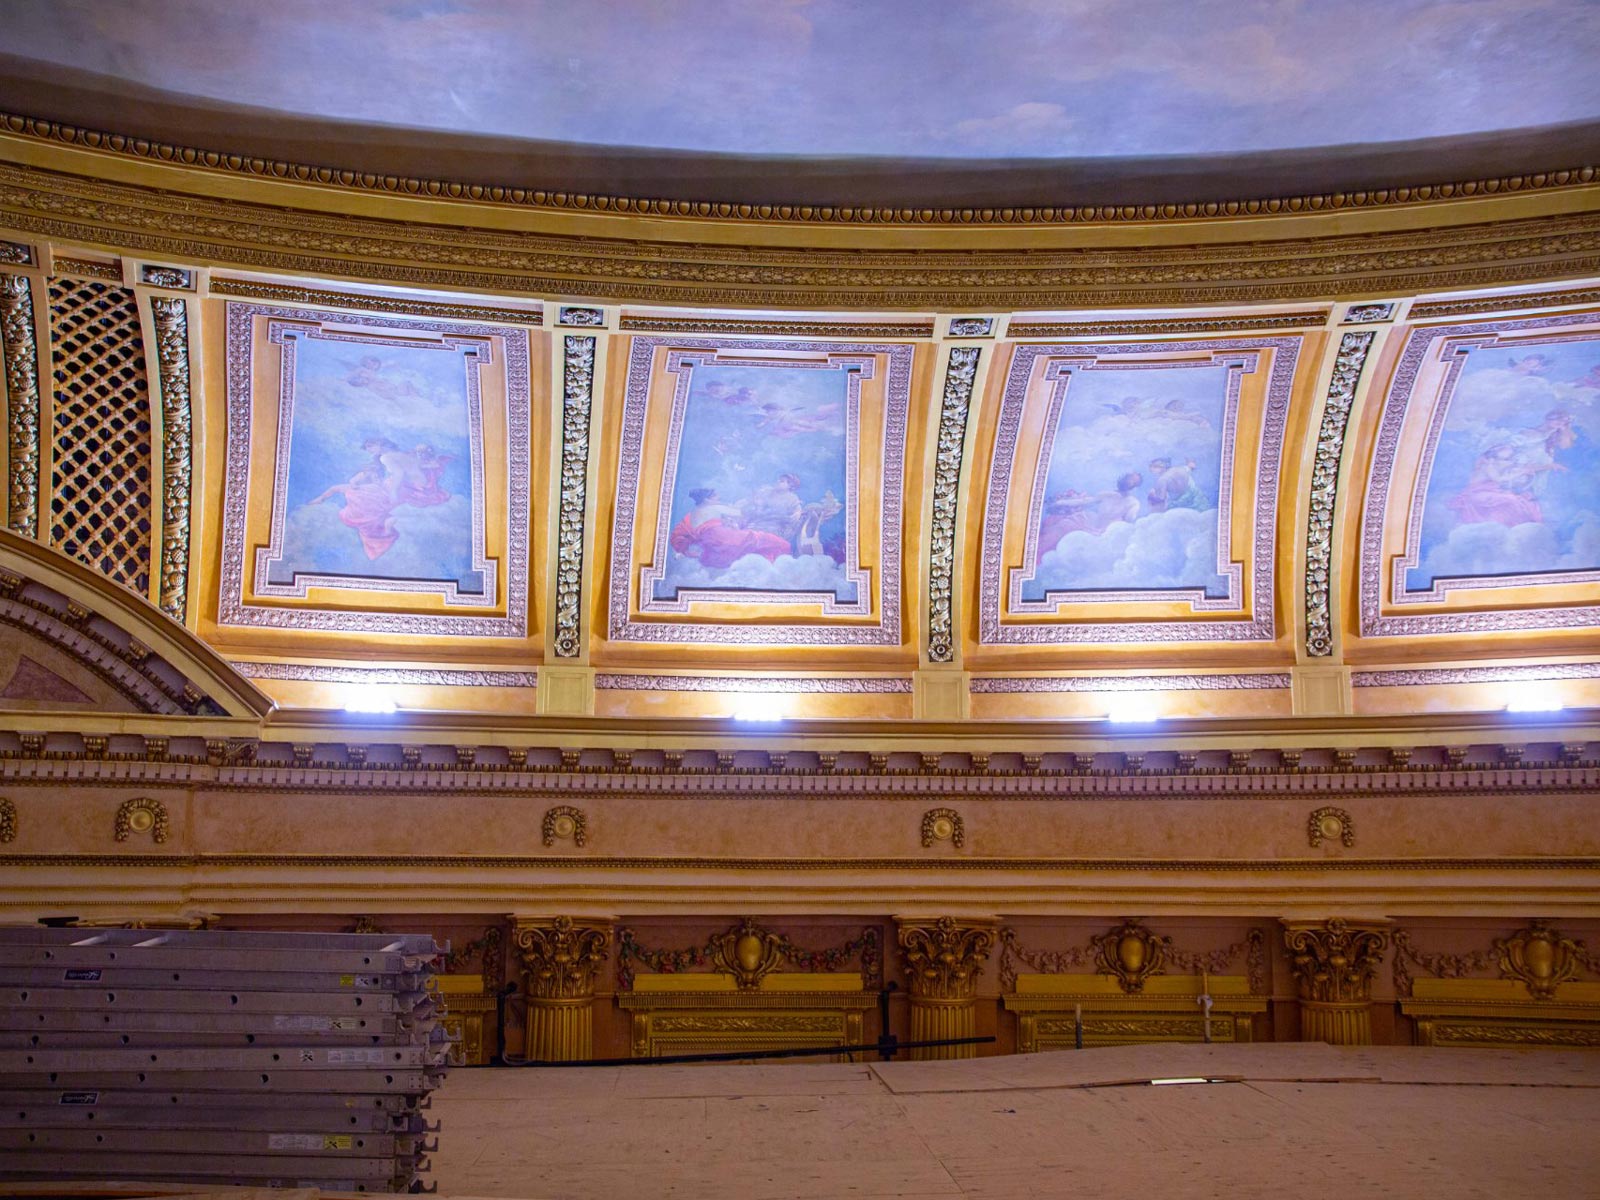 al ringling ceiling paintings with ladders nearby